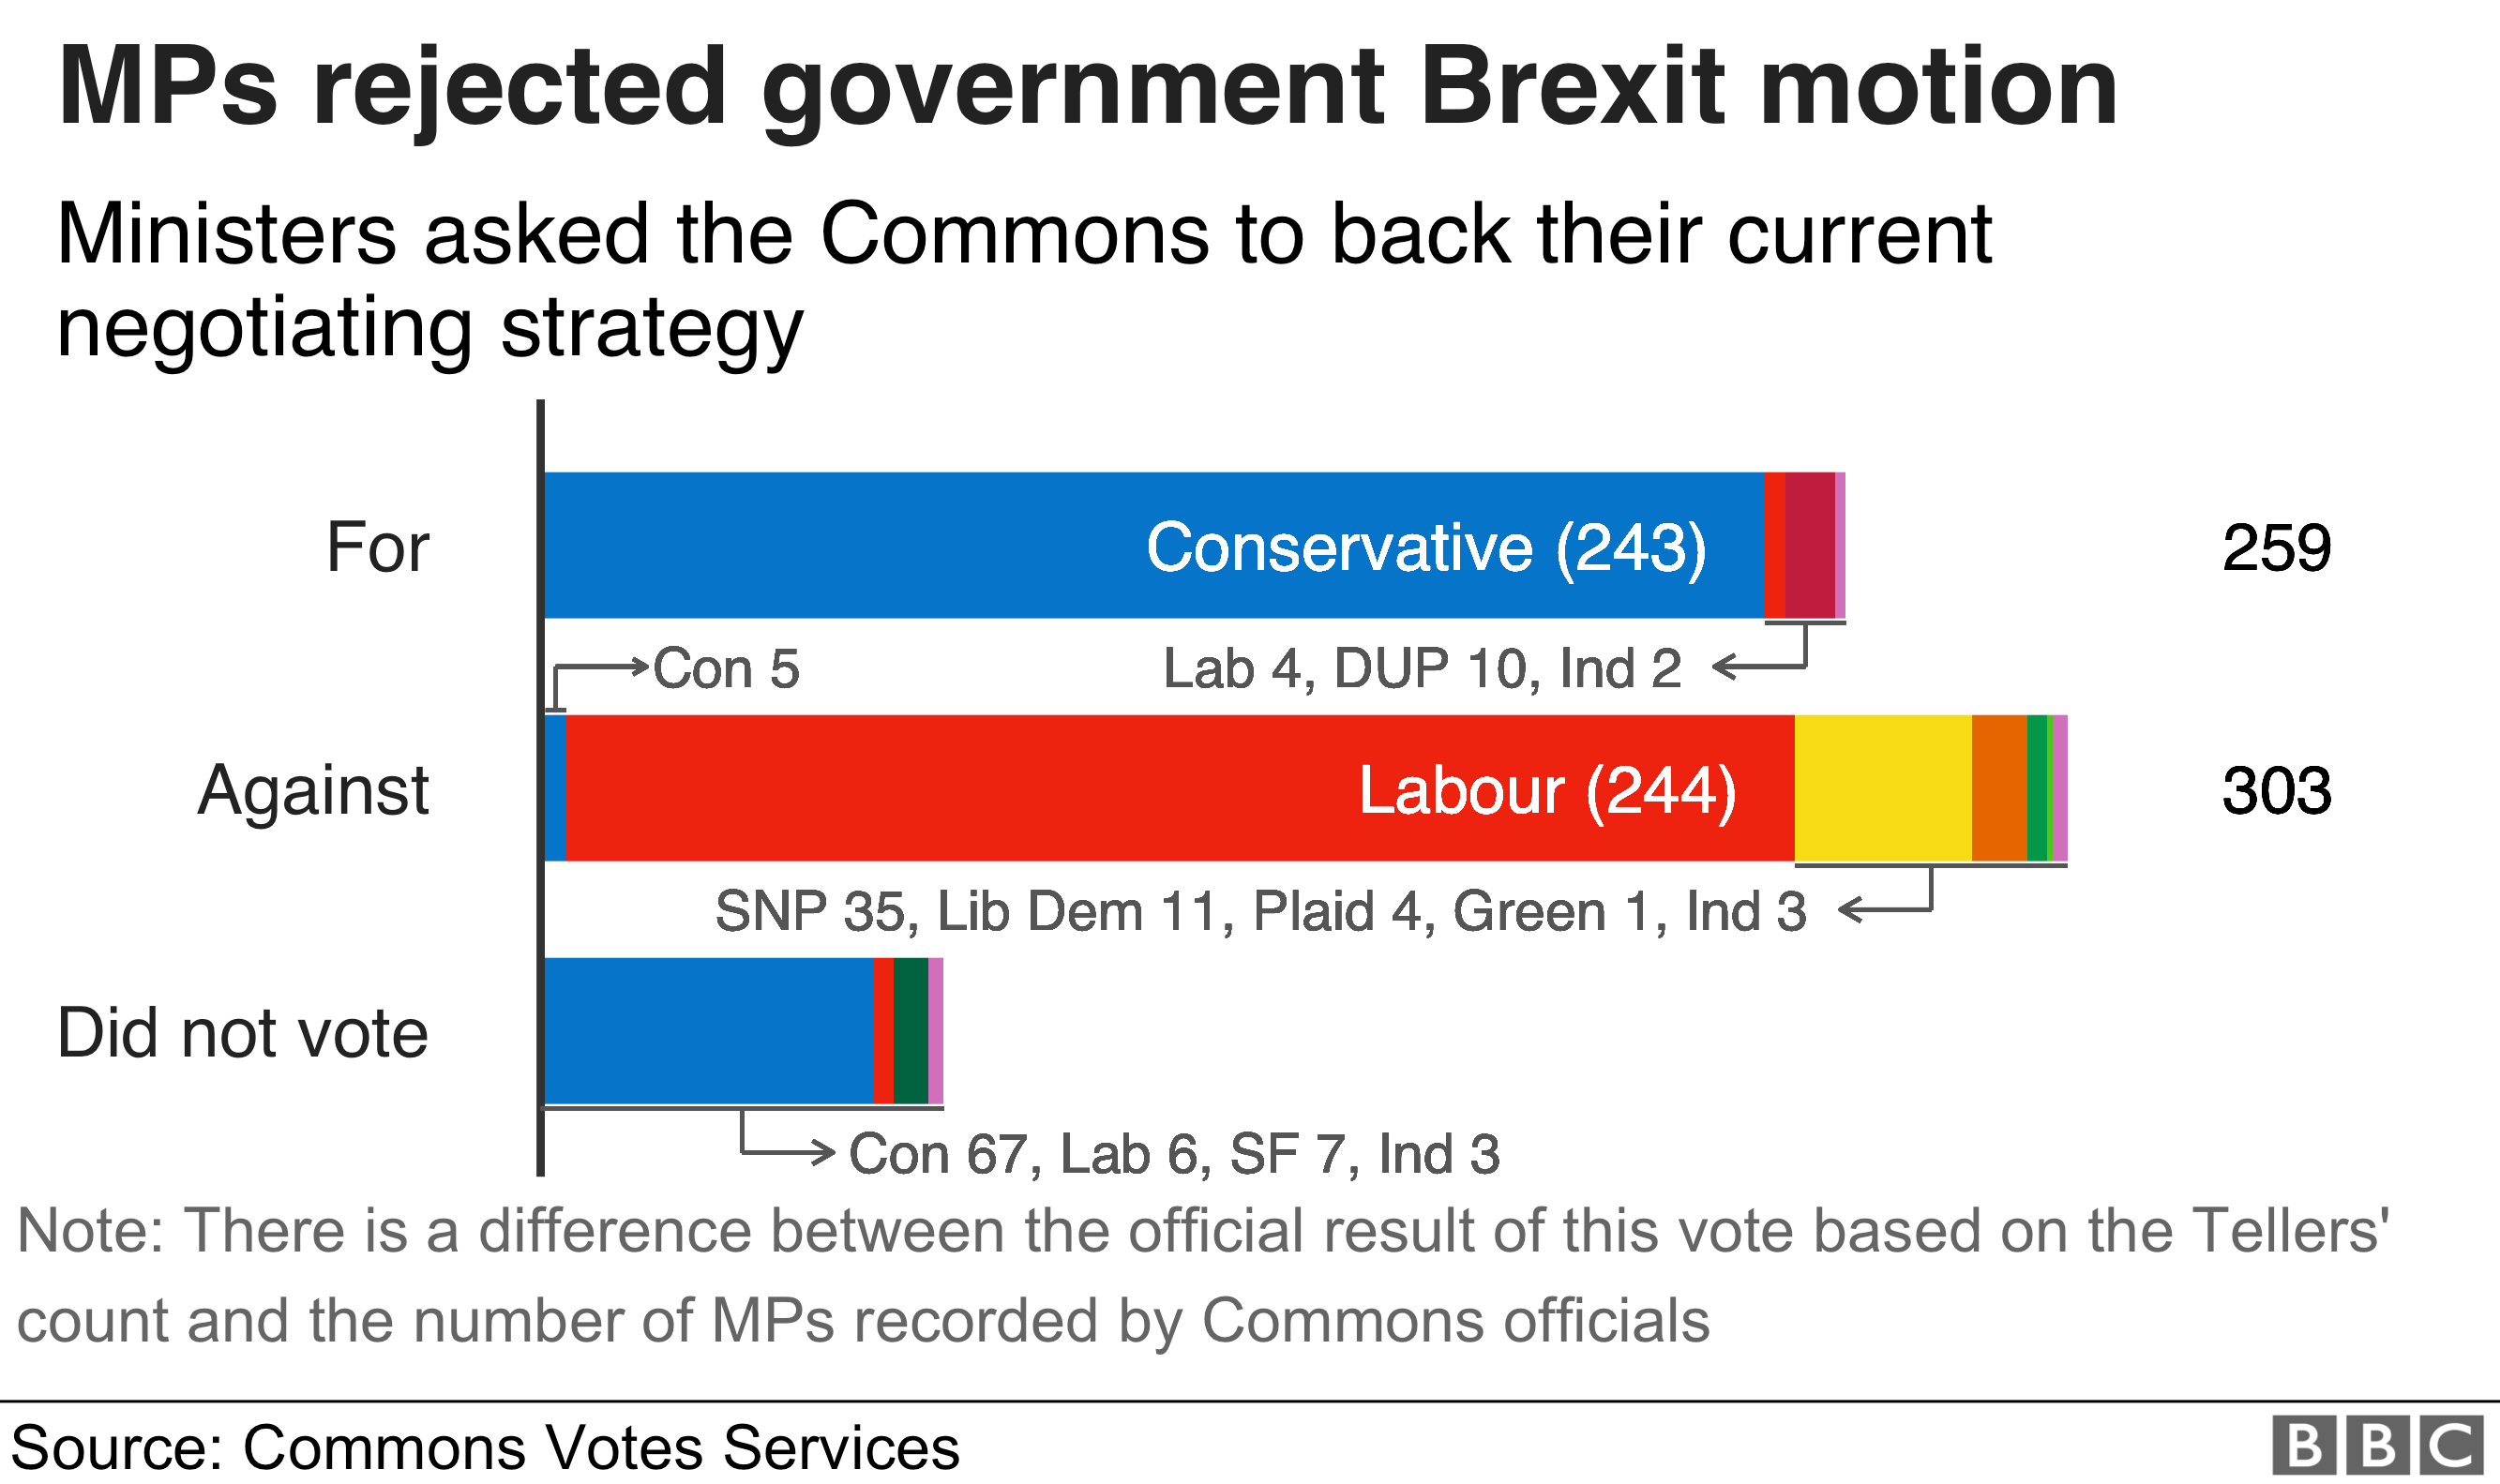 MPs rejected the government motion supporting its current Brexit strategy by 259 to 303